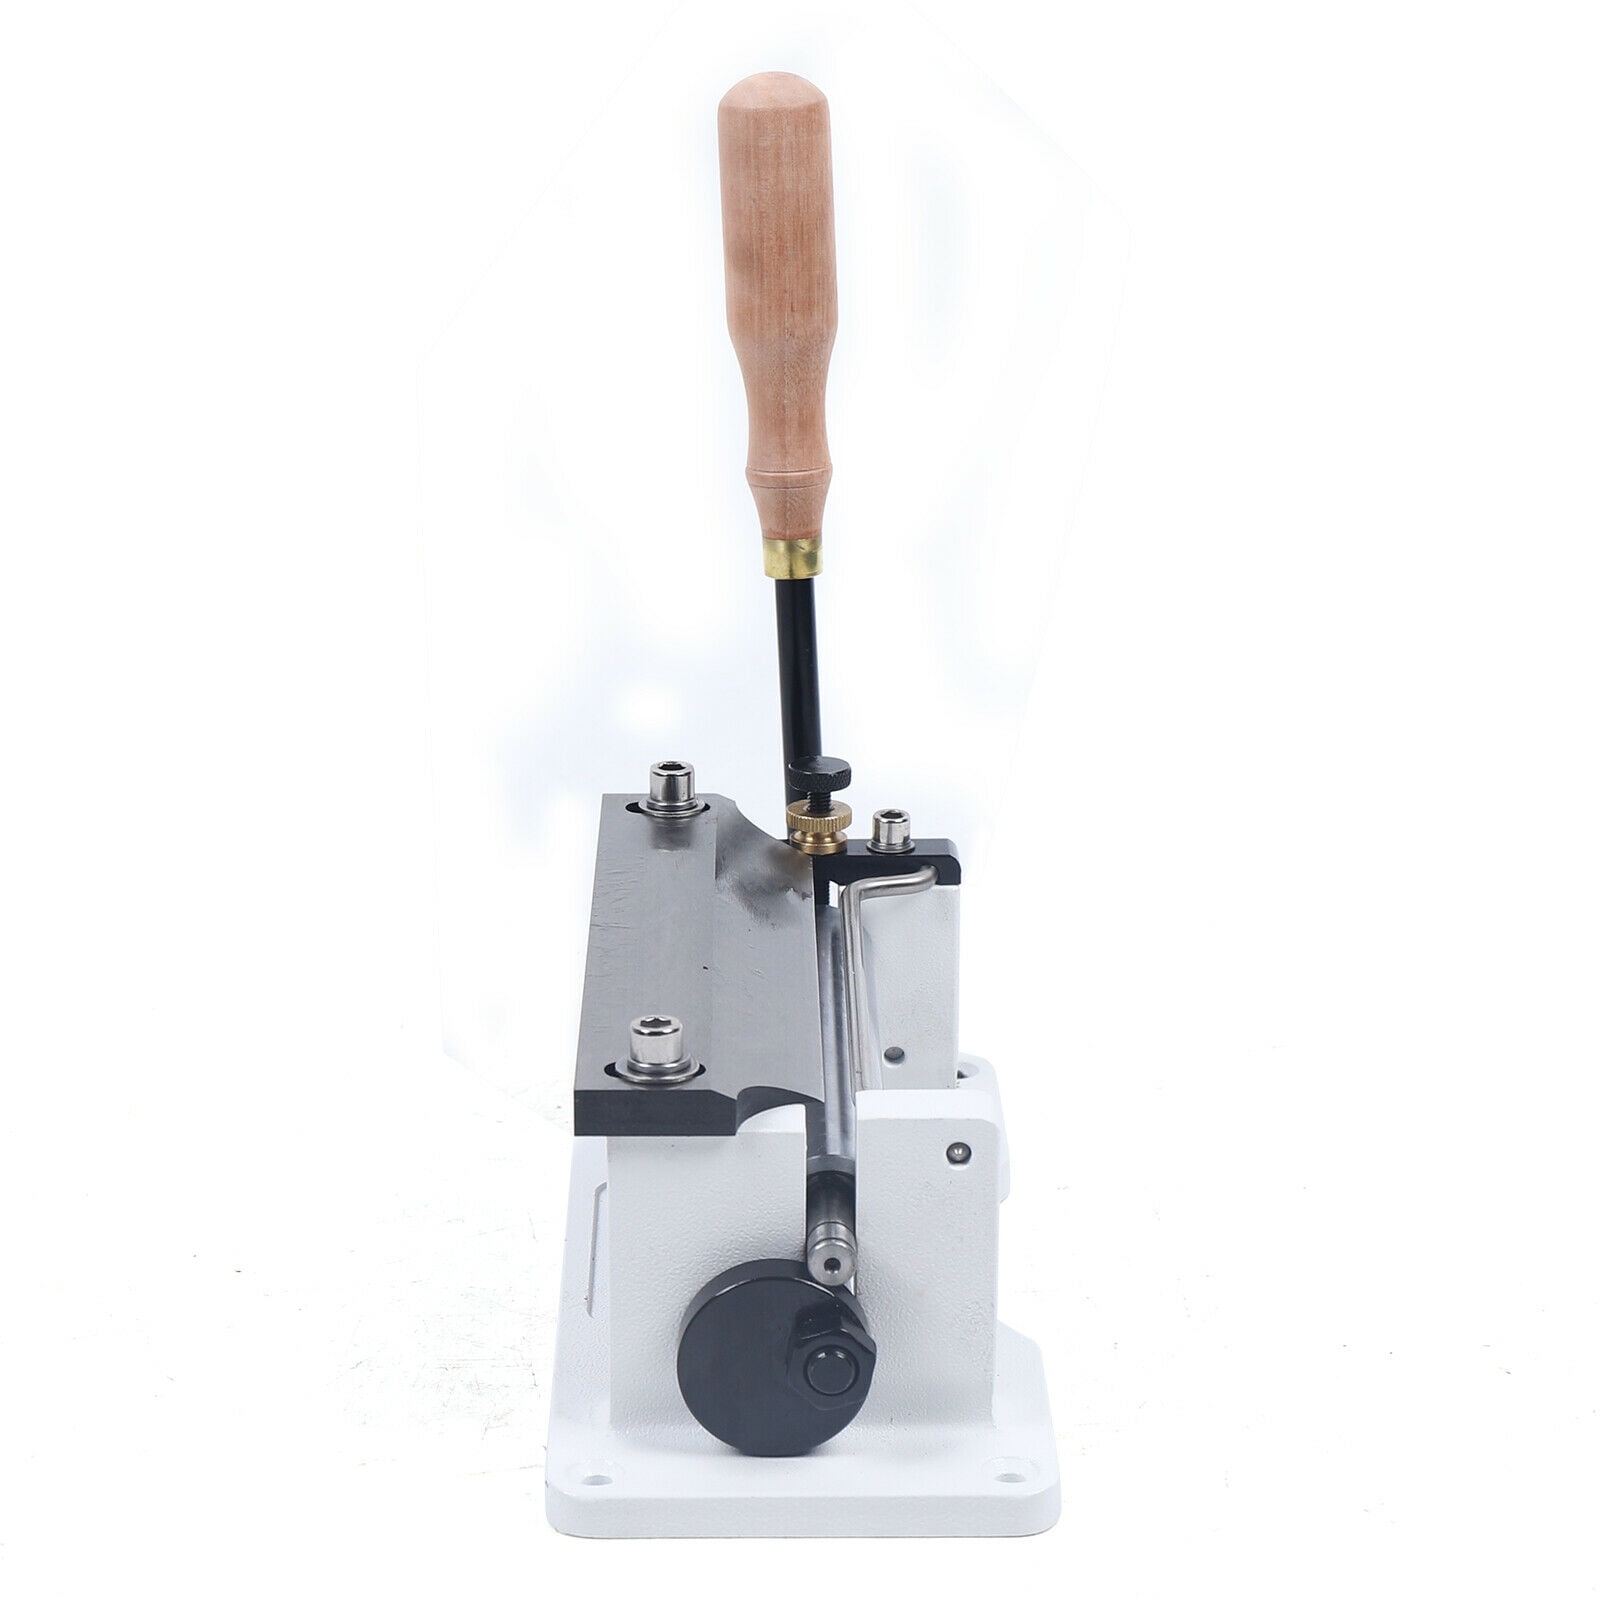 ER809BP Leather Splitter,RCIDOS leather Paring Device kit,Max 35mm width,Leather  Skiver,vegetable tanned leather peeler